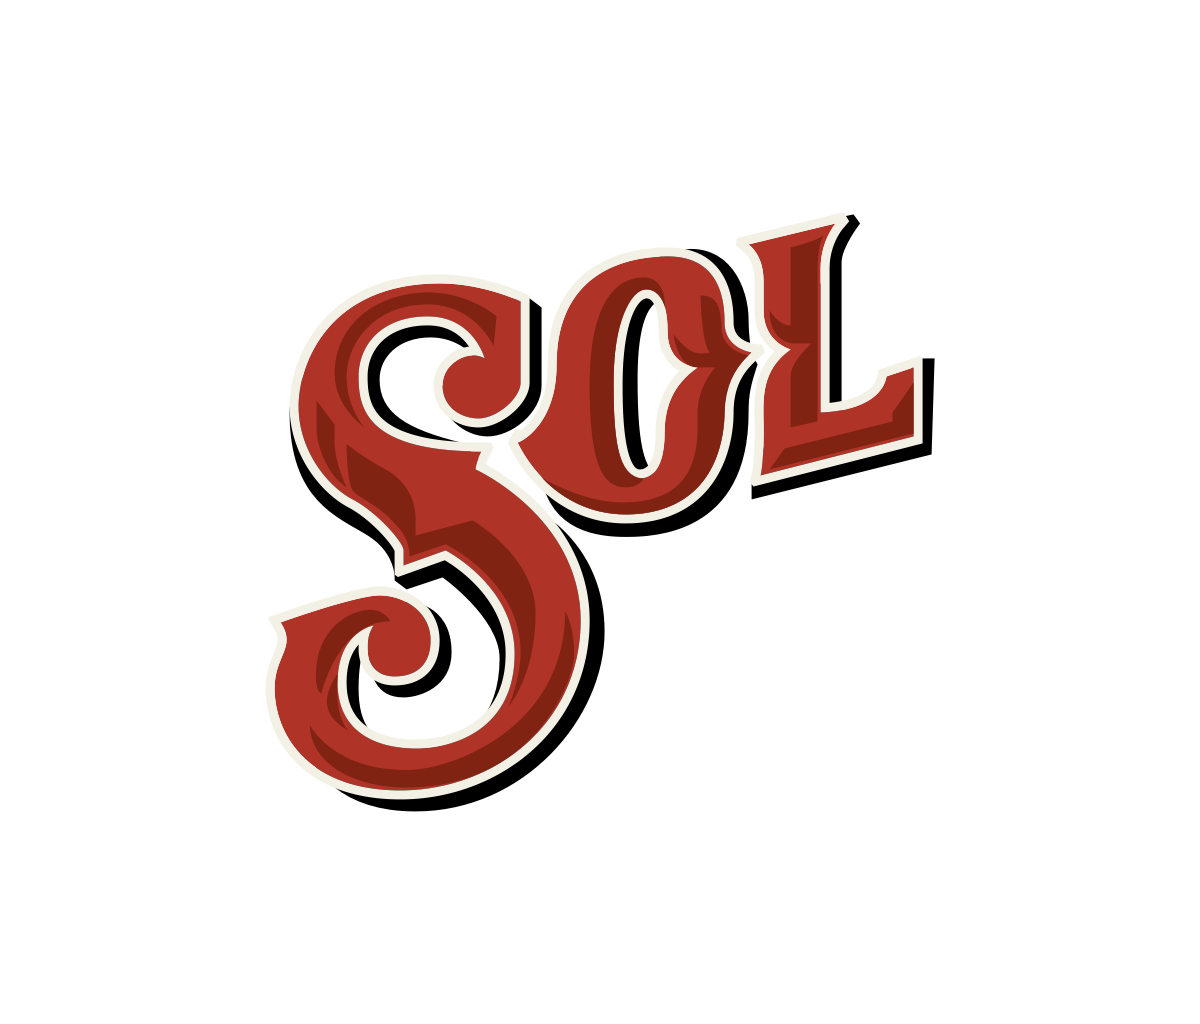 Sol Logo - Dribbble - sol-logo.png by Bobby Anderson